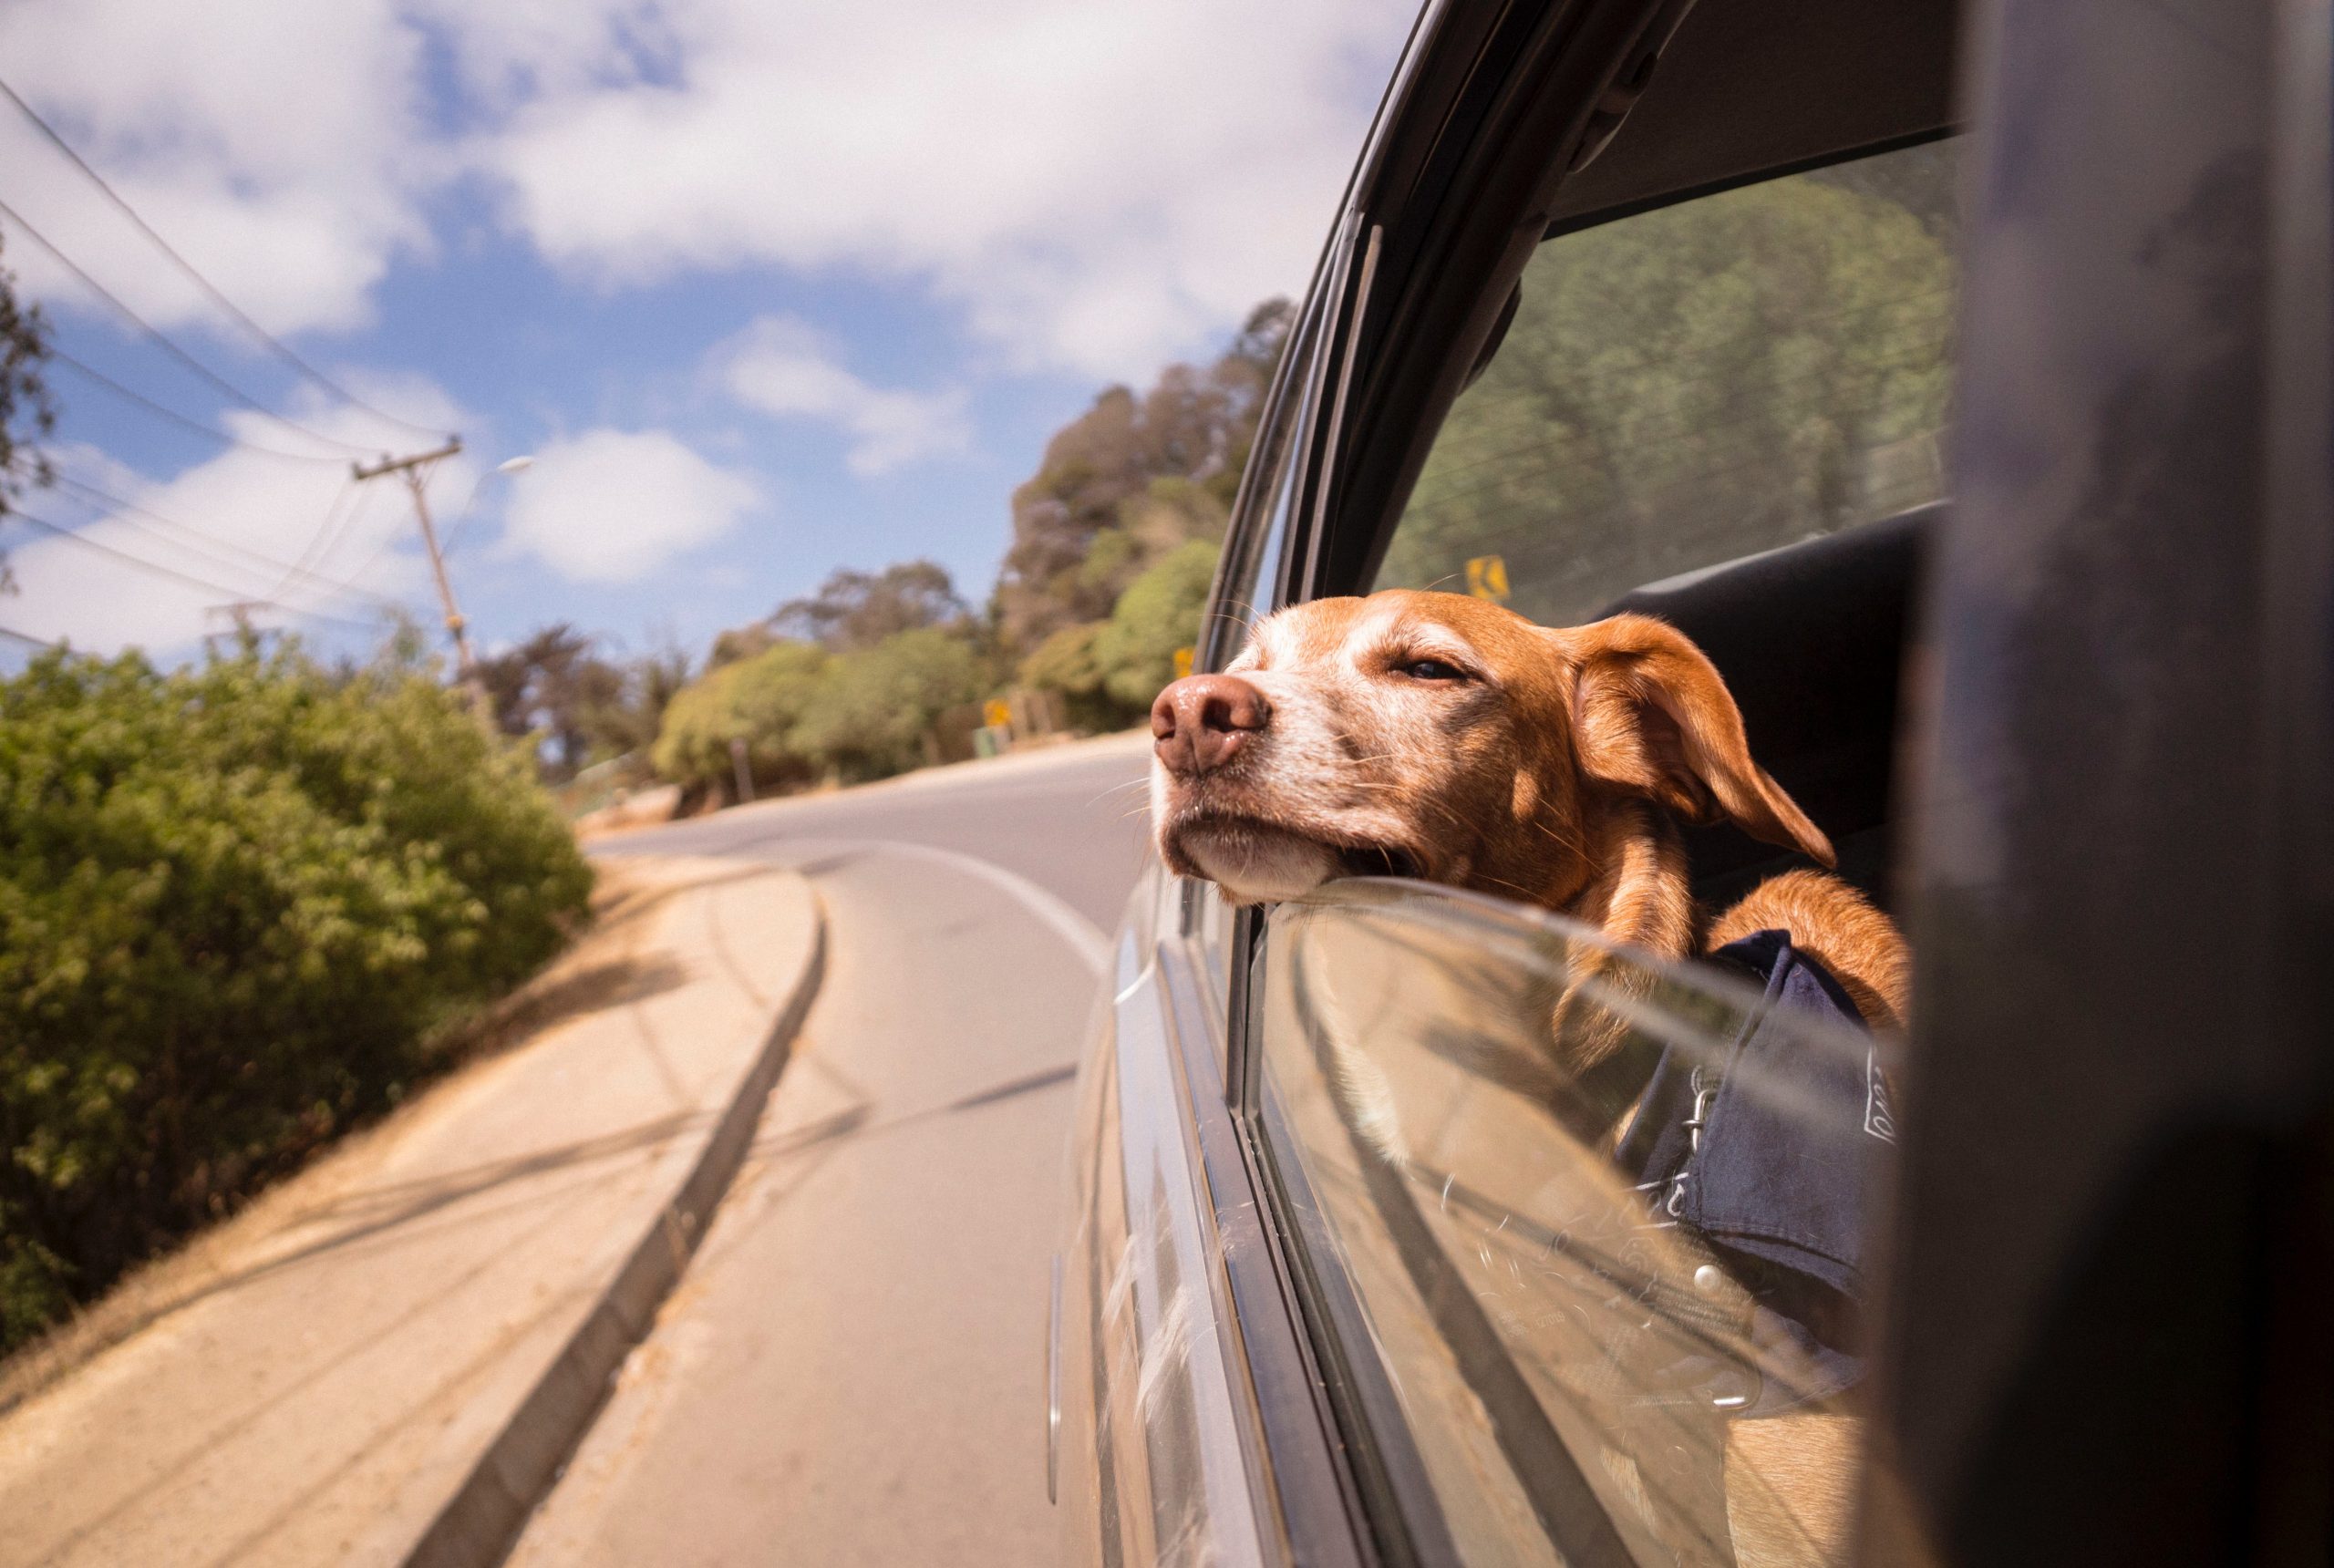 Driving with dogs: Top tips for keeping your pup safe in the car